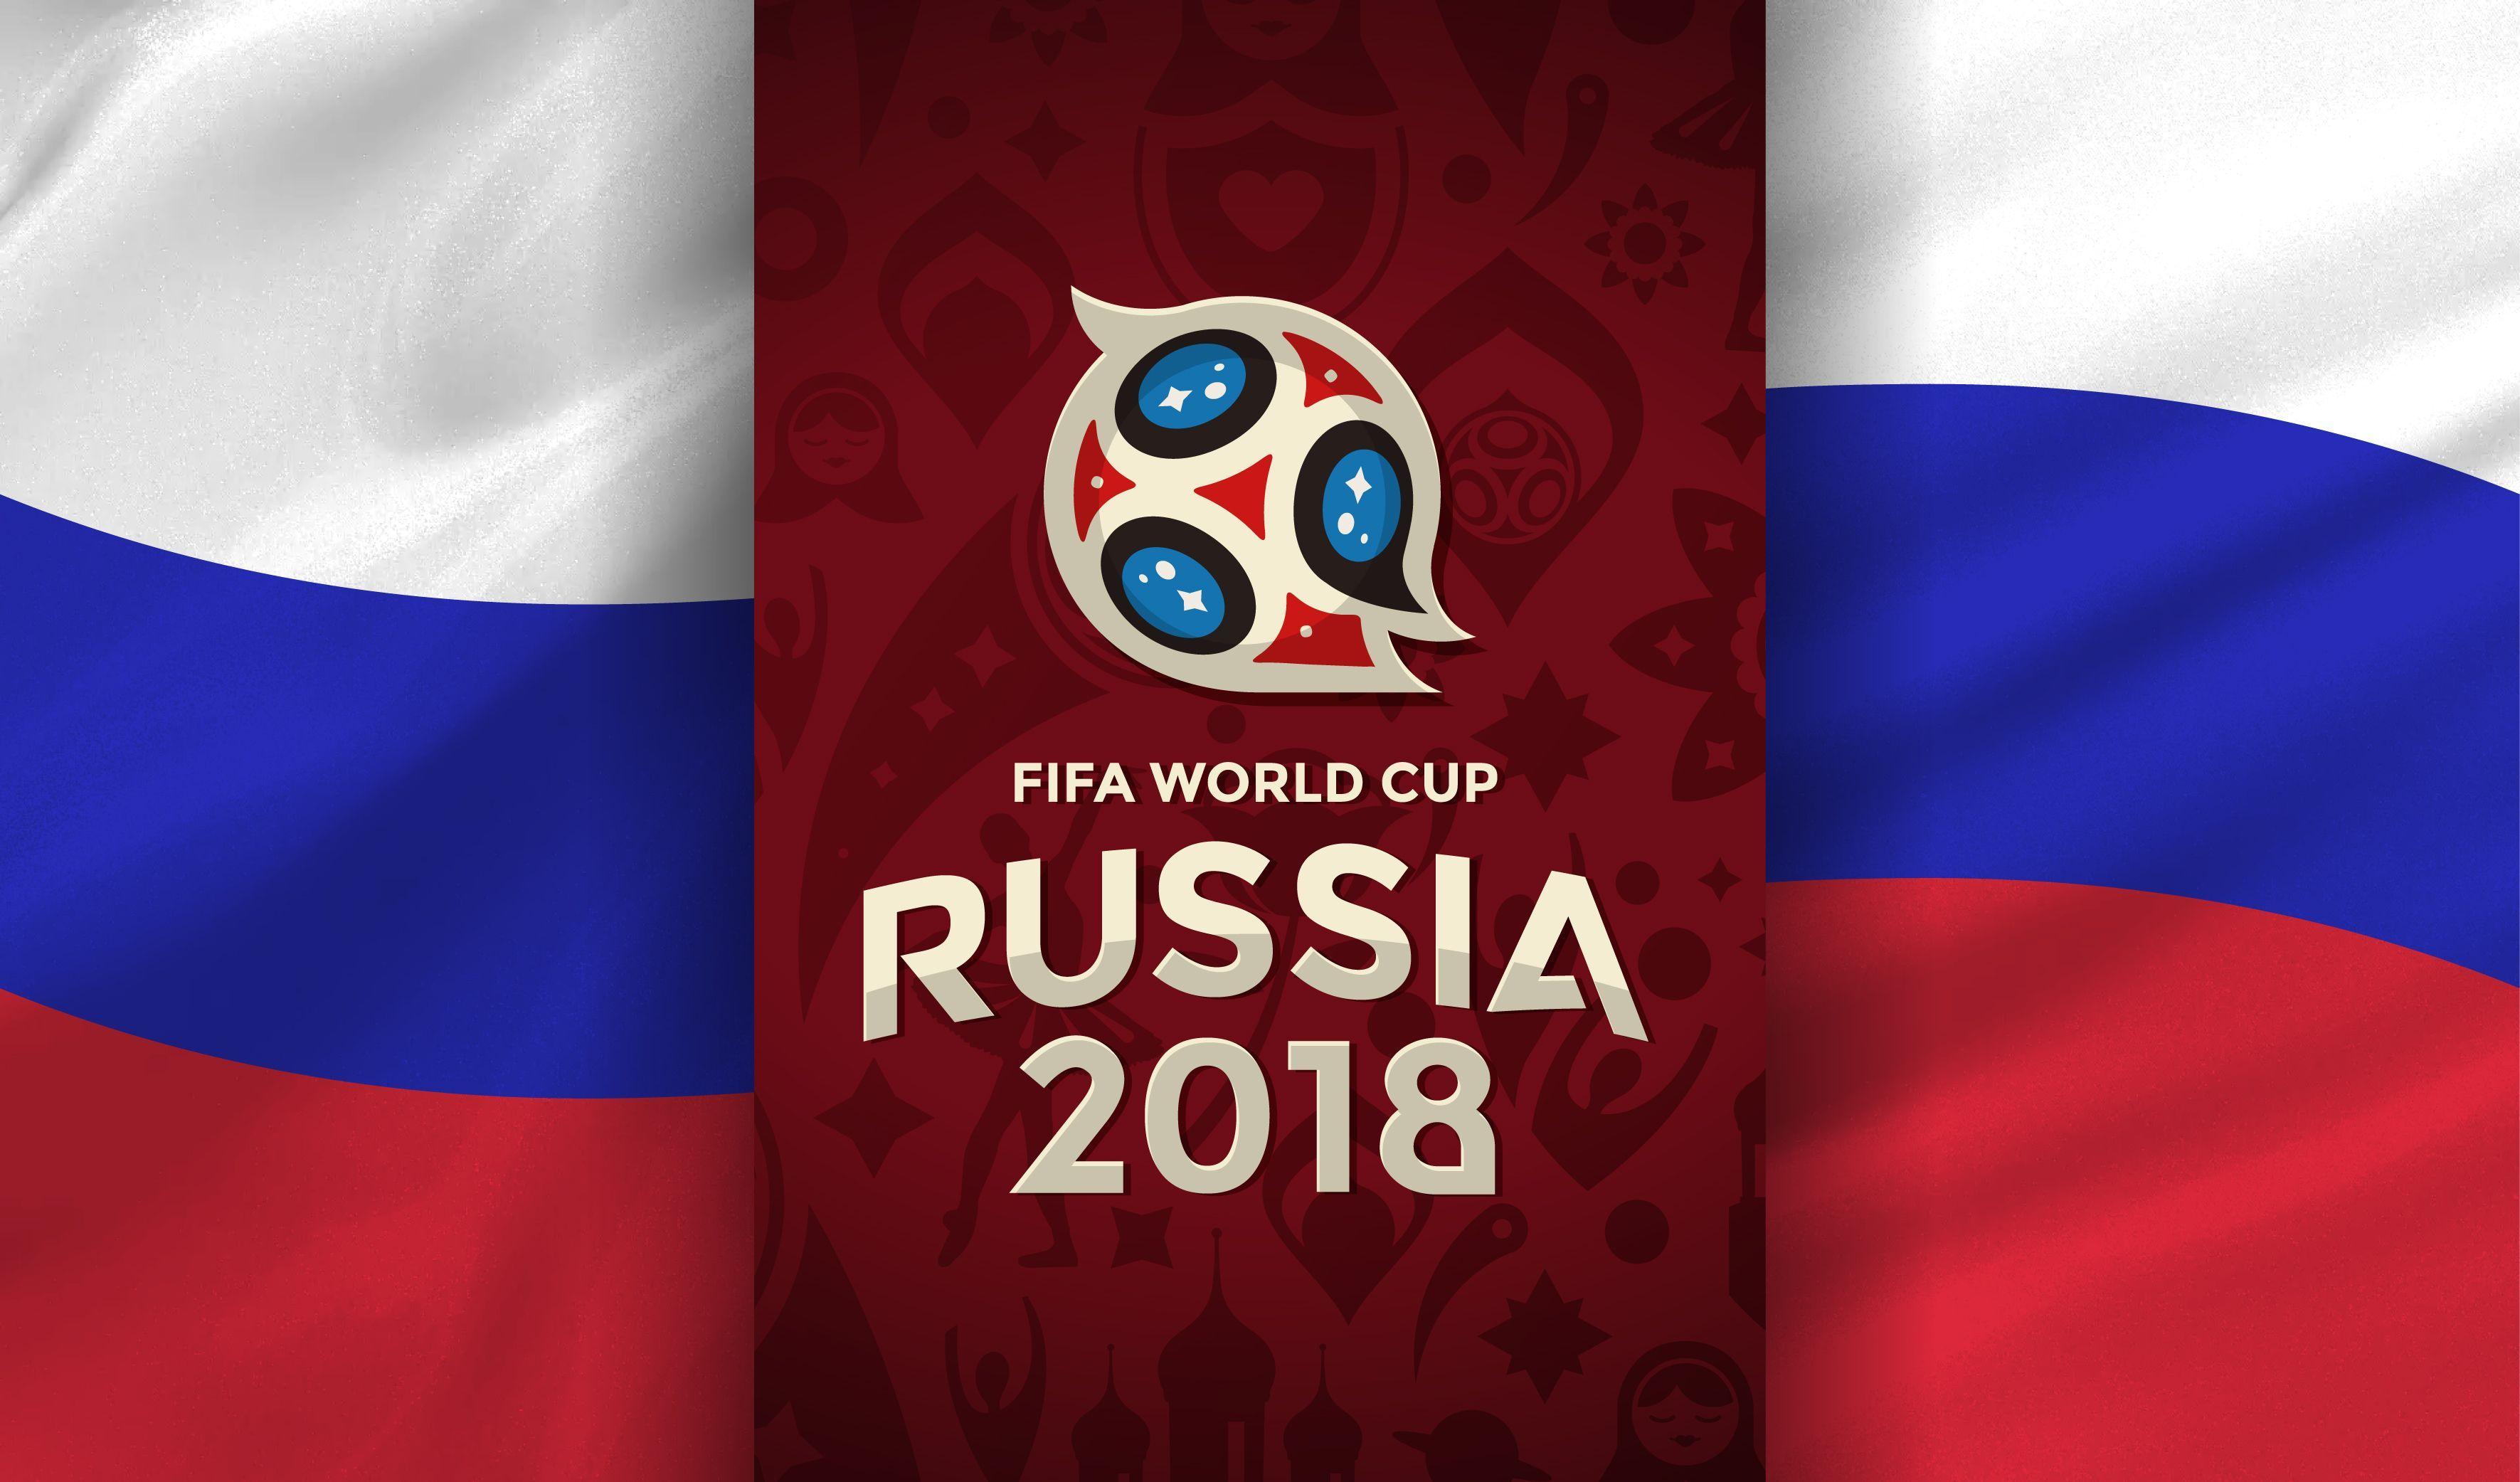 world cup 2018 wallpaper world cup 2018 photo world cup 2018